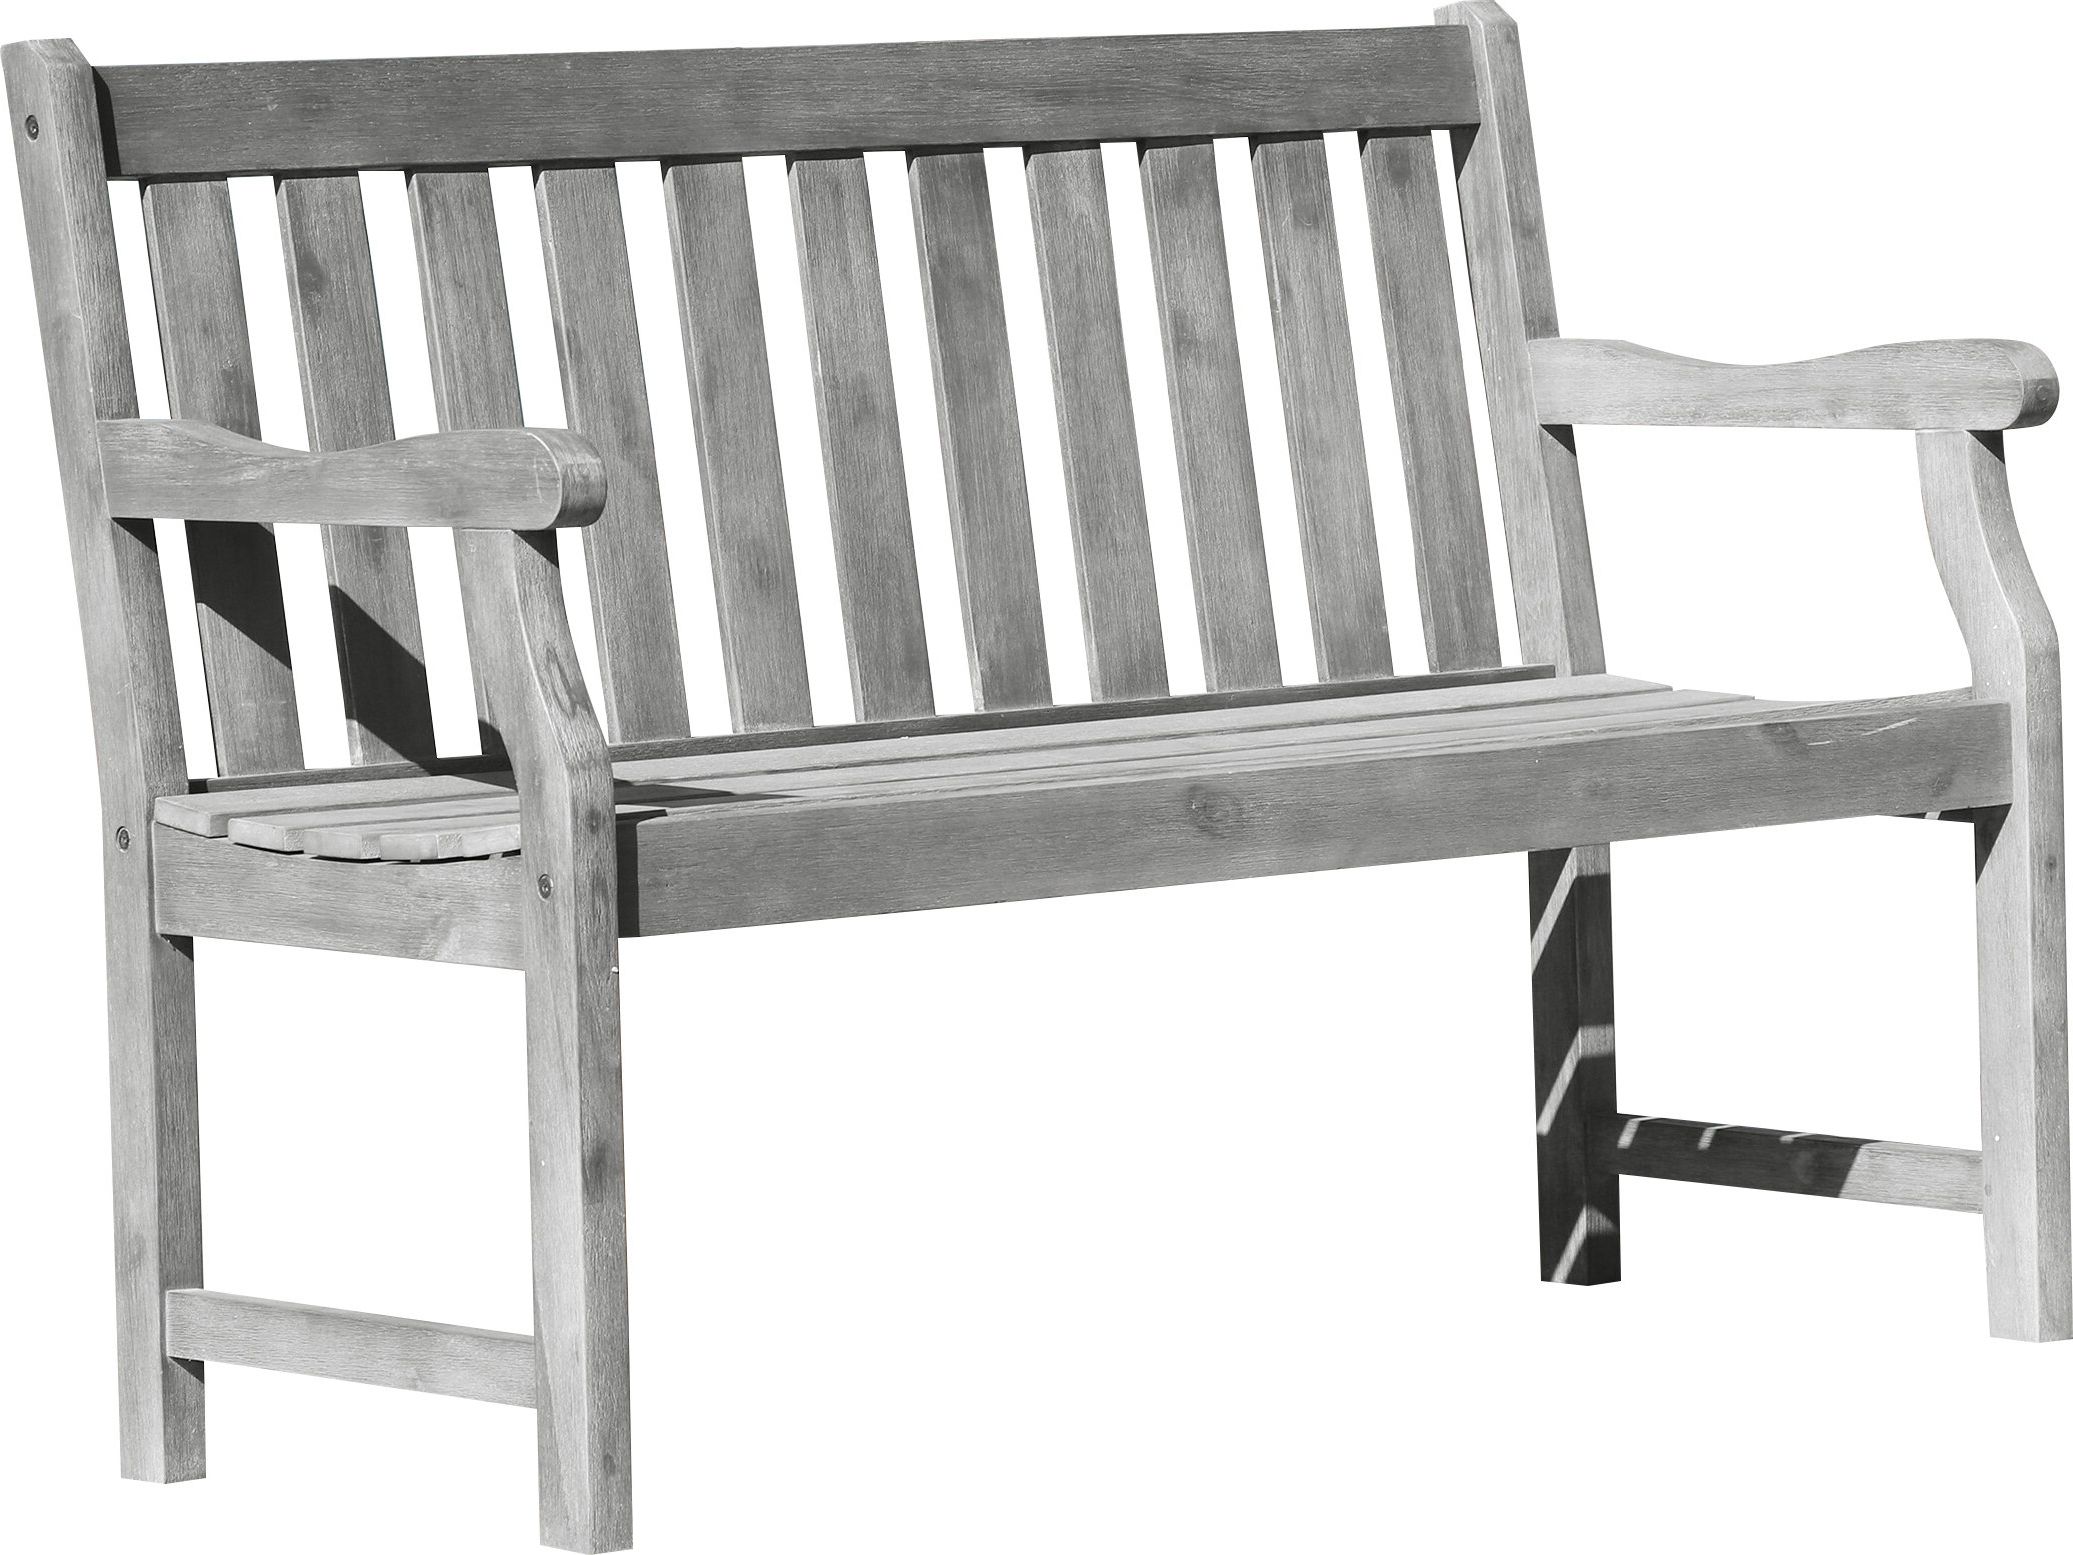 Manchester Solid Wood Garden Bench For Most Up To Date Manchester Wooden Garden Benches (View 1 of 30)